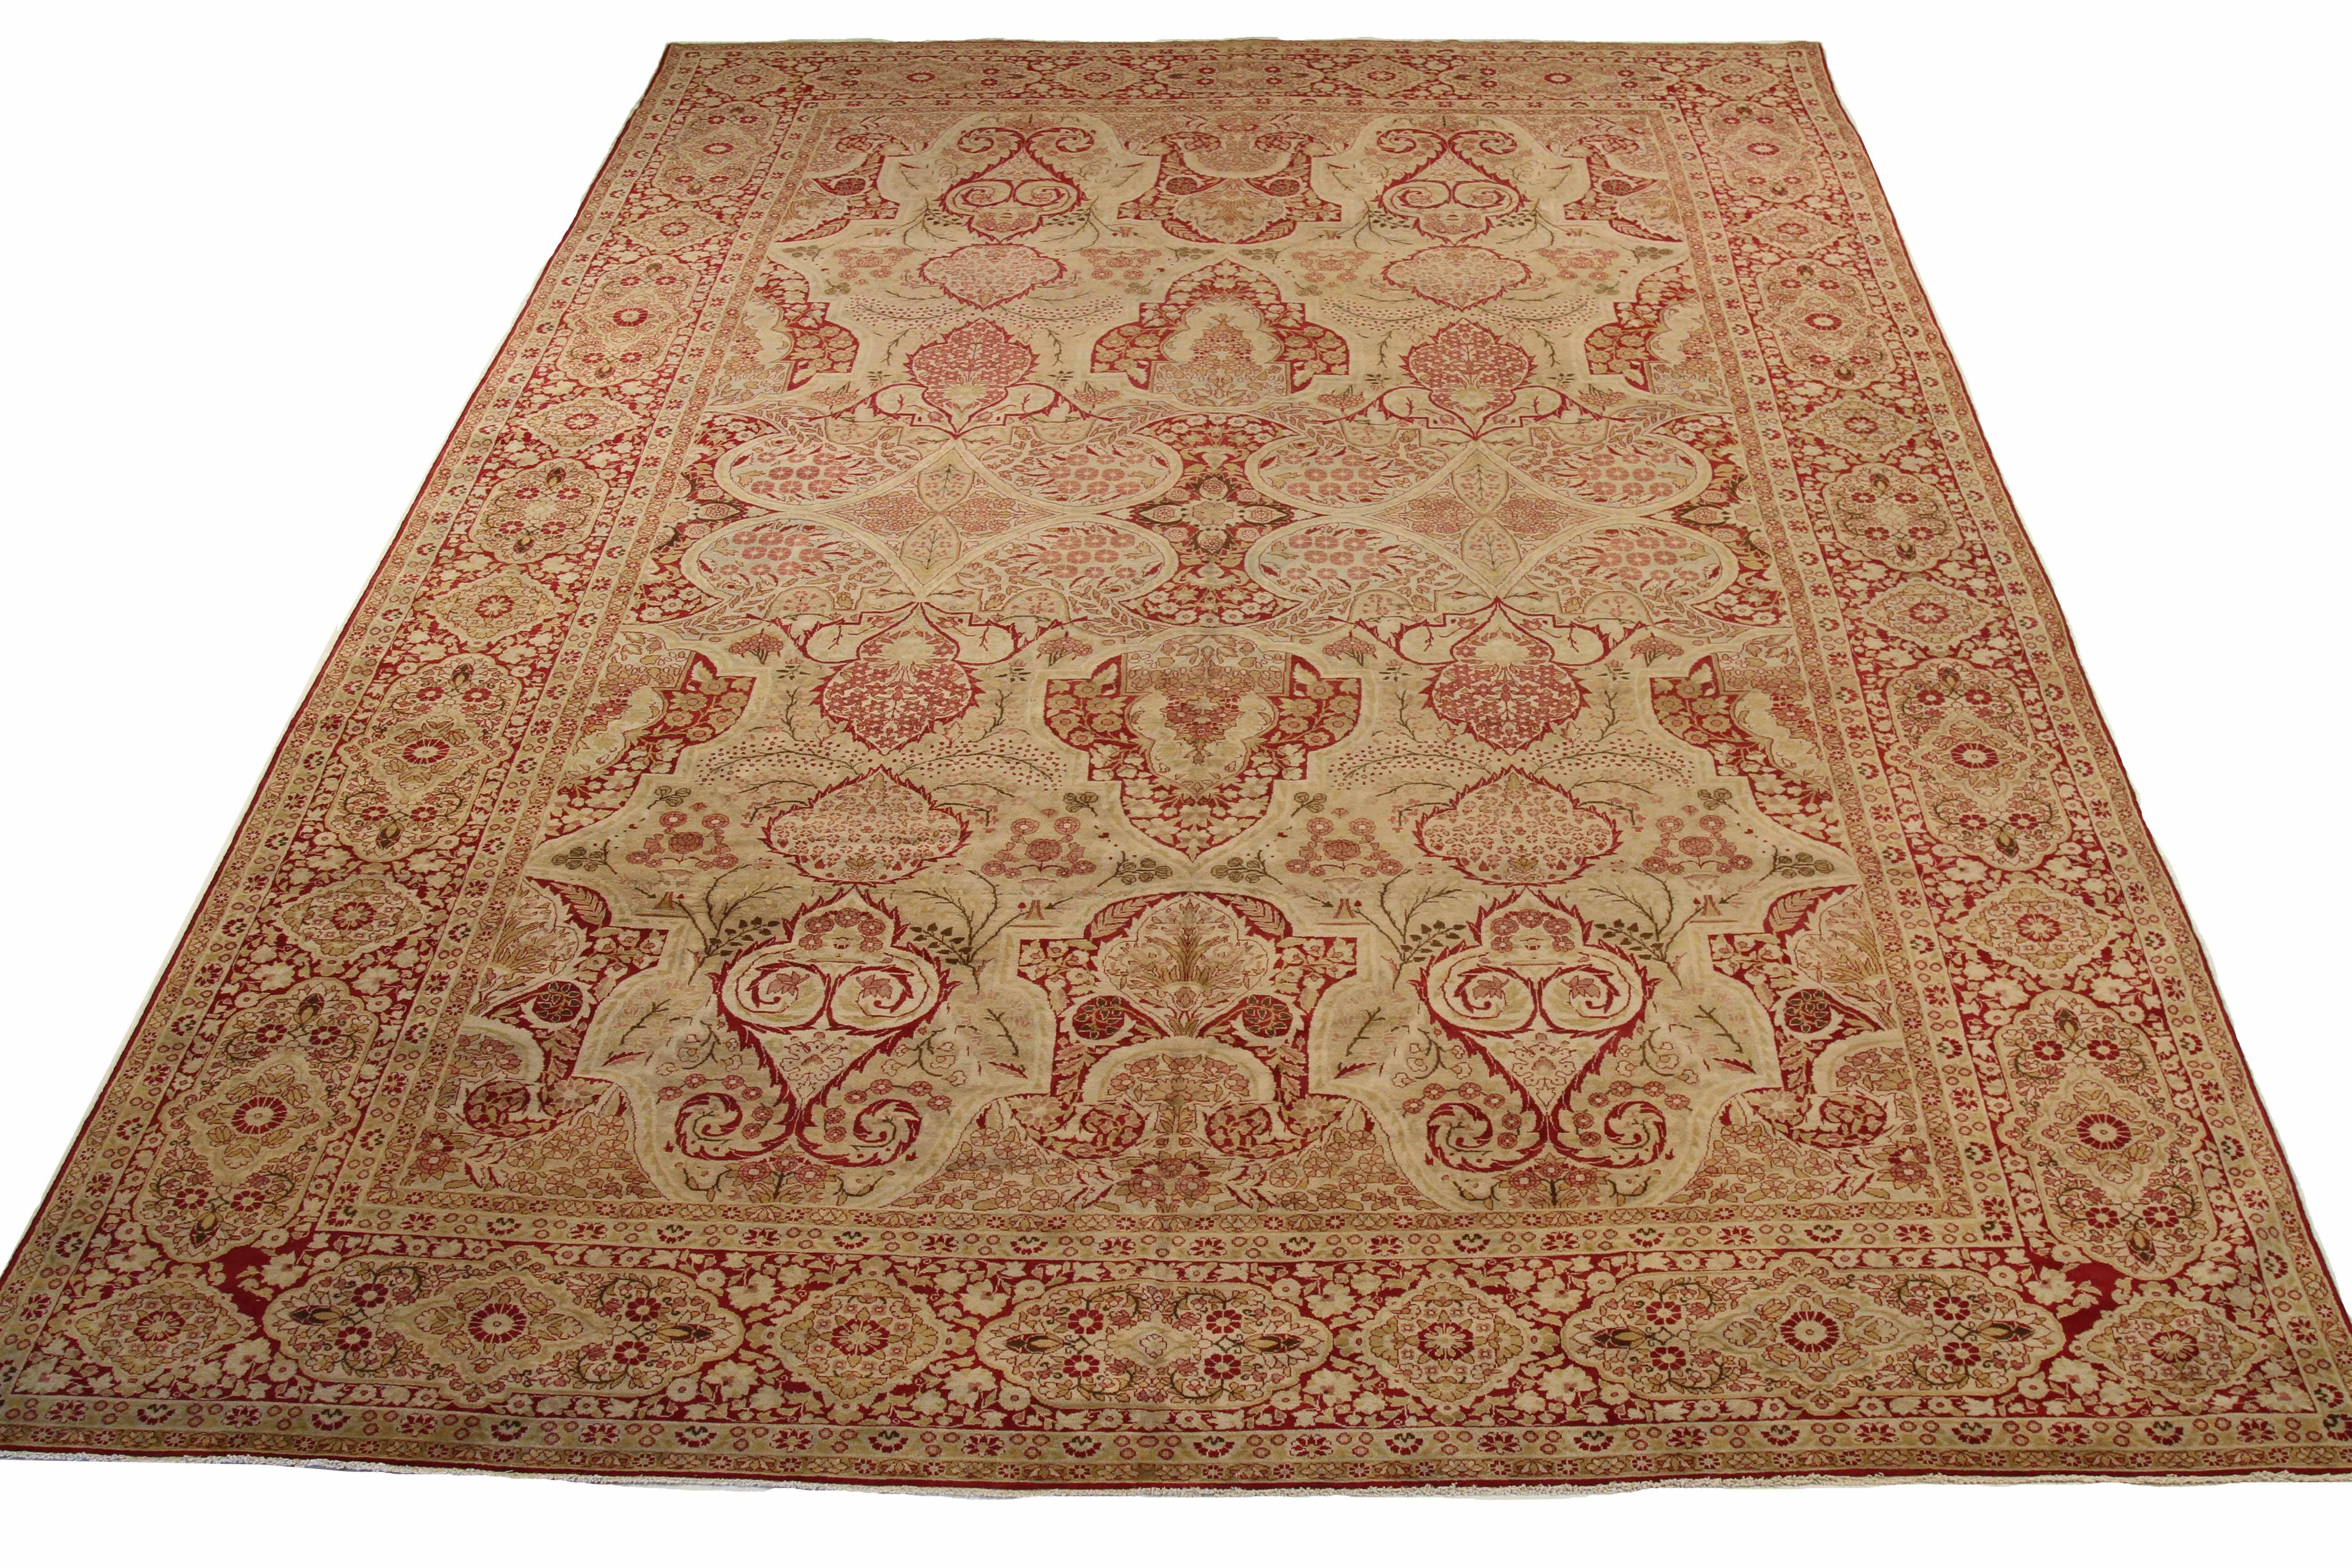 Antique Persian area rug handwoven from the finest sheep’s wool. It’s colored with all-natural vegetable dyes that are safe for humans and pets. It’s a traditional Yazd design handwoven by expert artisans. It’s a lovely area rug that can be